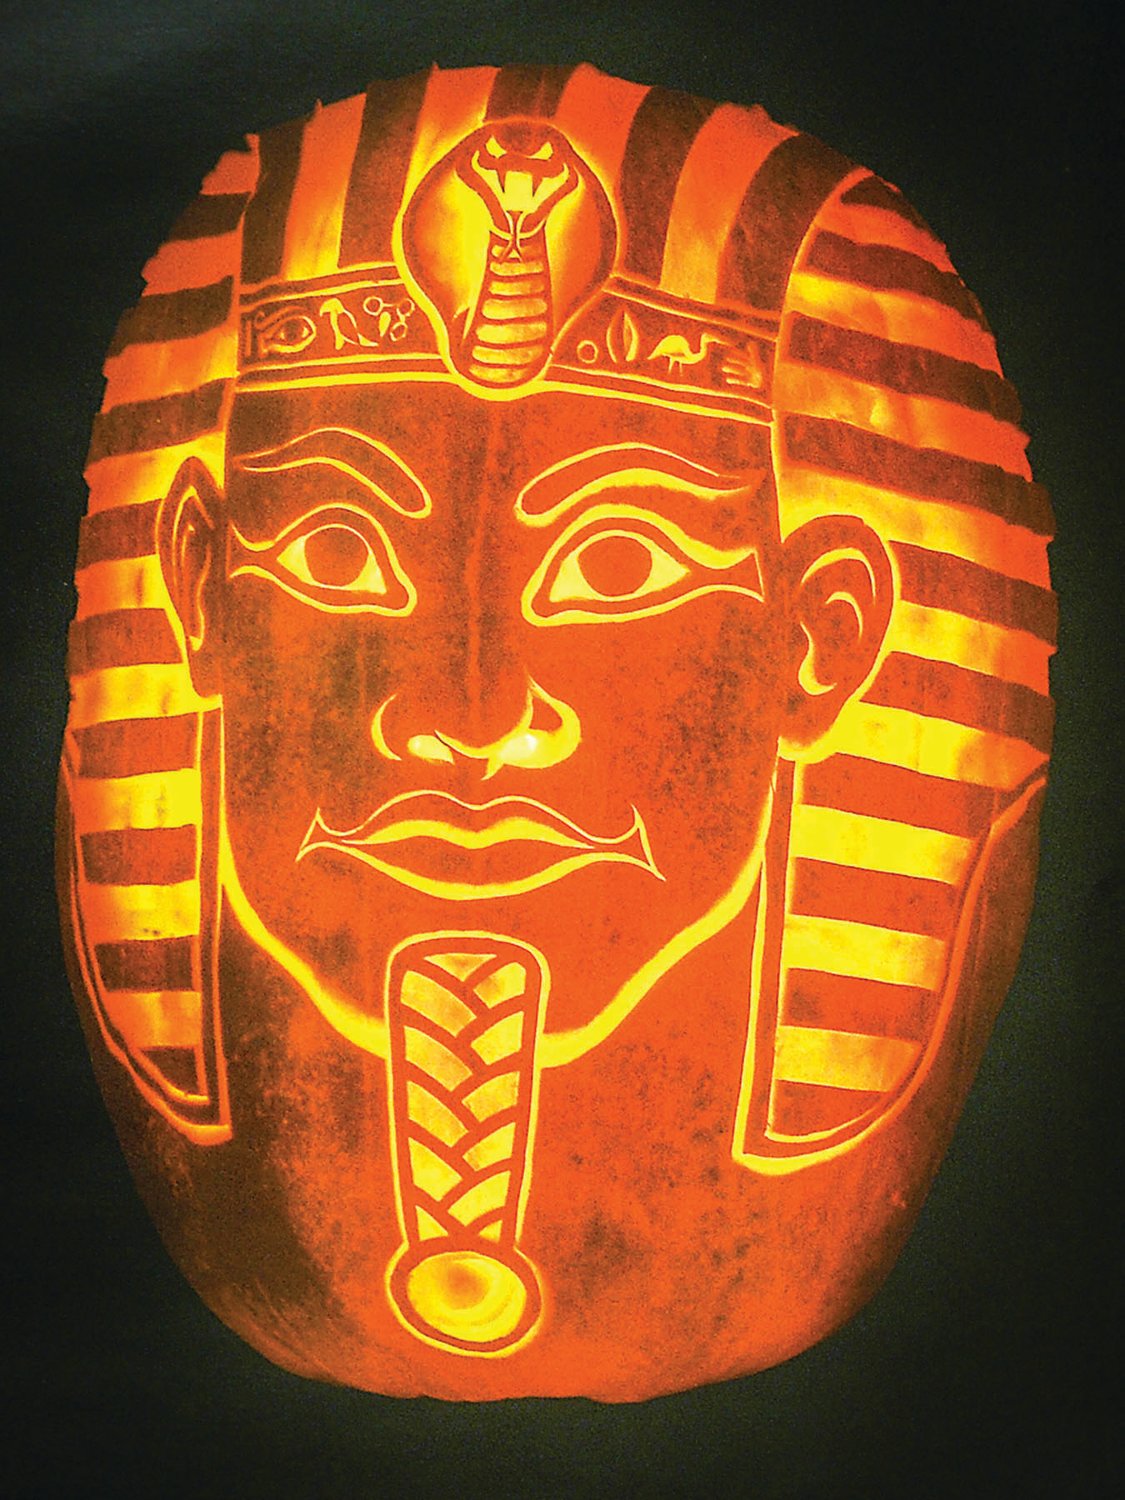 An elaborate pharaoh carved by Tomas Gonzales is a far cry from the basic design that is being jabbed and sawn out of pumpkins all across America each October.